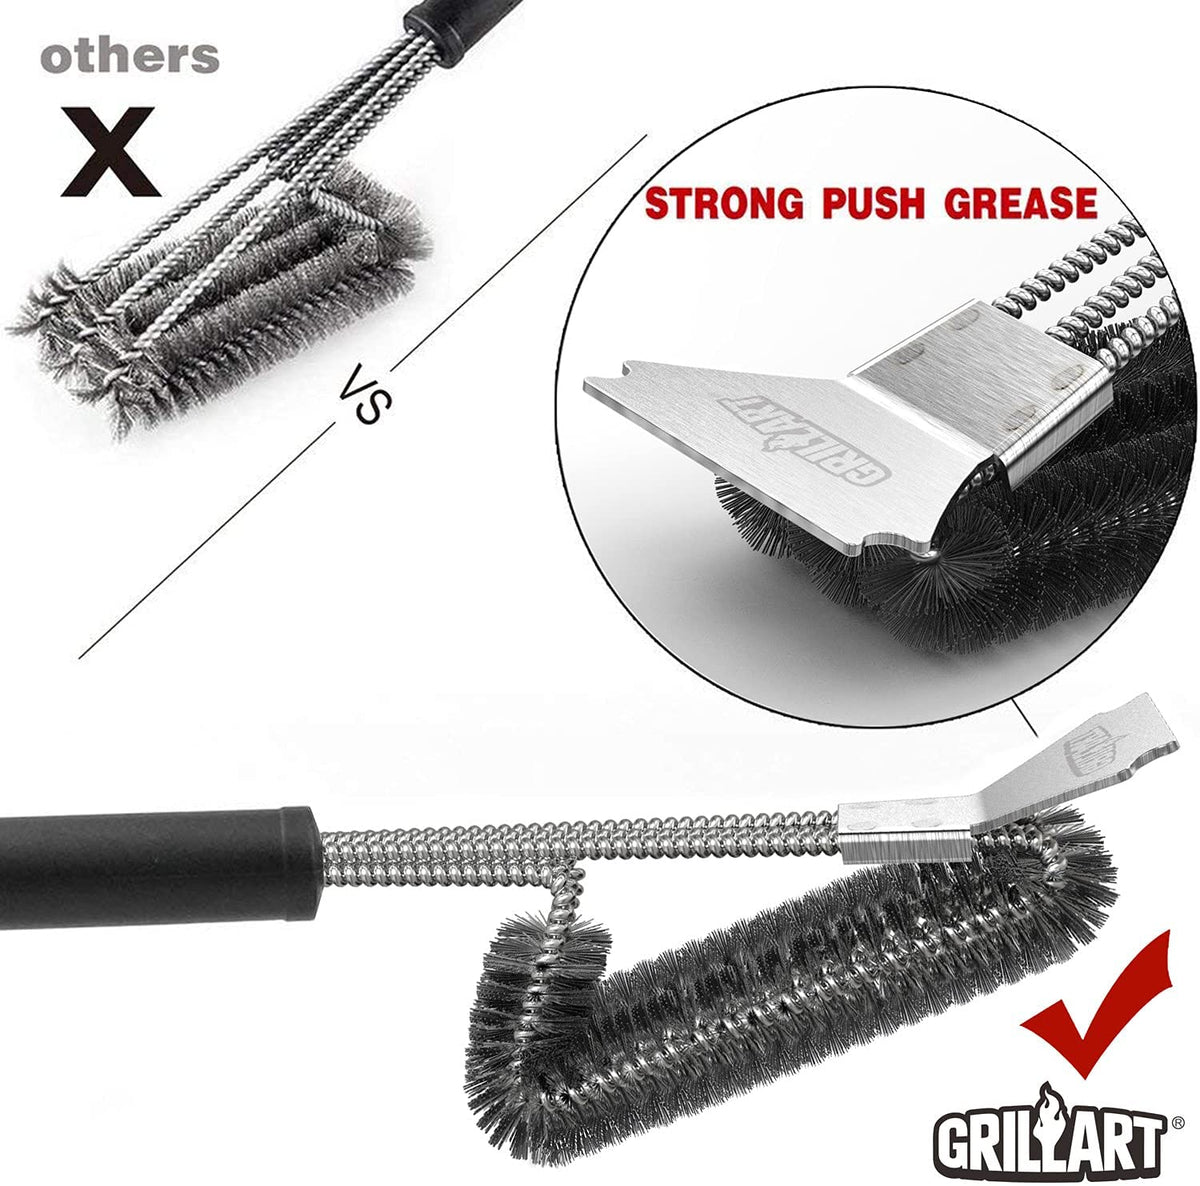 GRILLART Grill Brush Bristle Free - Safe BBQ Cleaning Grill Brush and  Scraper - 18 Best Stainless Steel Grilling Accessories Cleaner for Weber  Gas/Charcoal Porcelain/Ceramic/Iron/steel grill Grates 